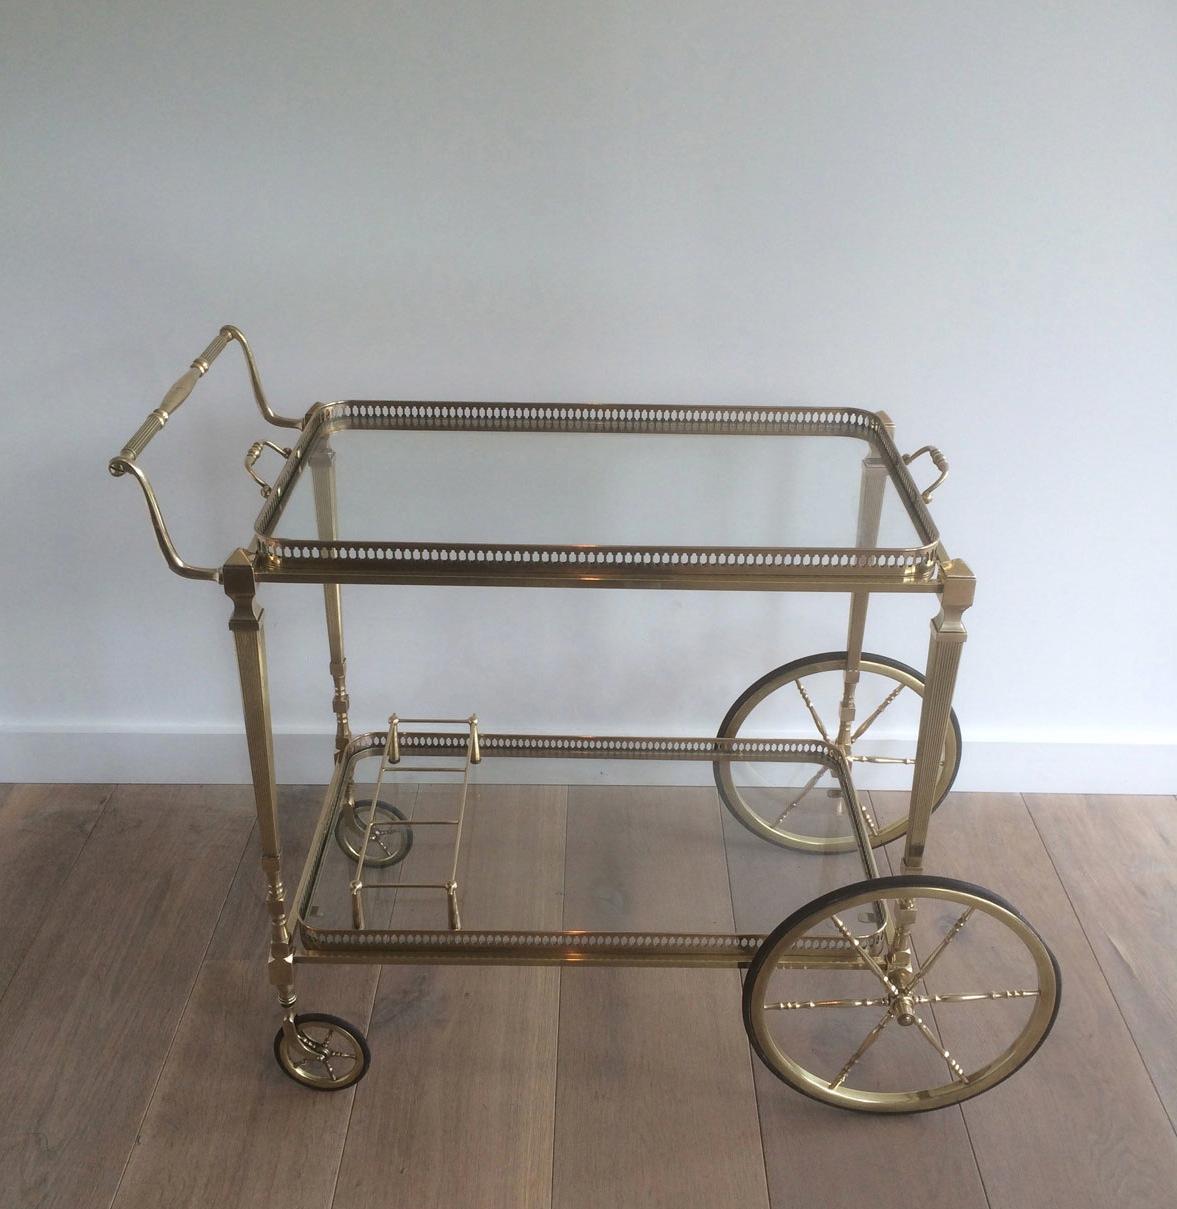 This neoclassical style bar cart is made of brass with removable glass trays. This is a French work by famous designer Maison Jansen. Circa 1940.